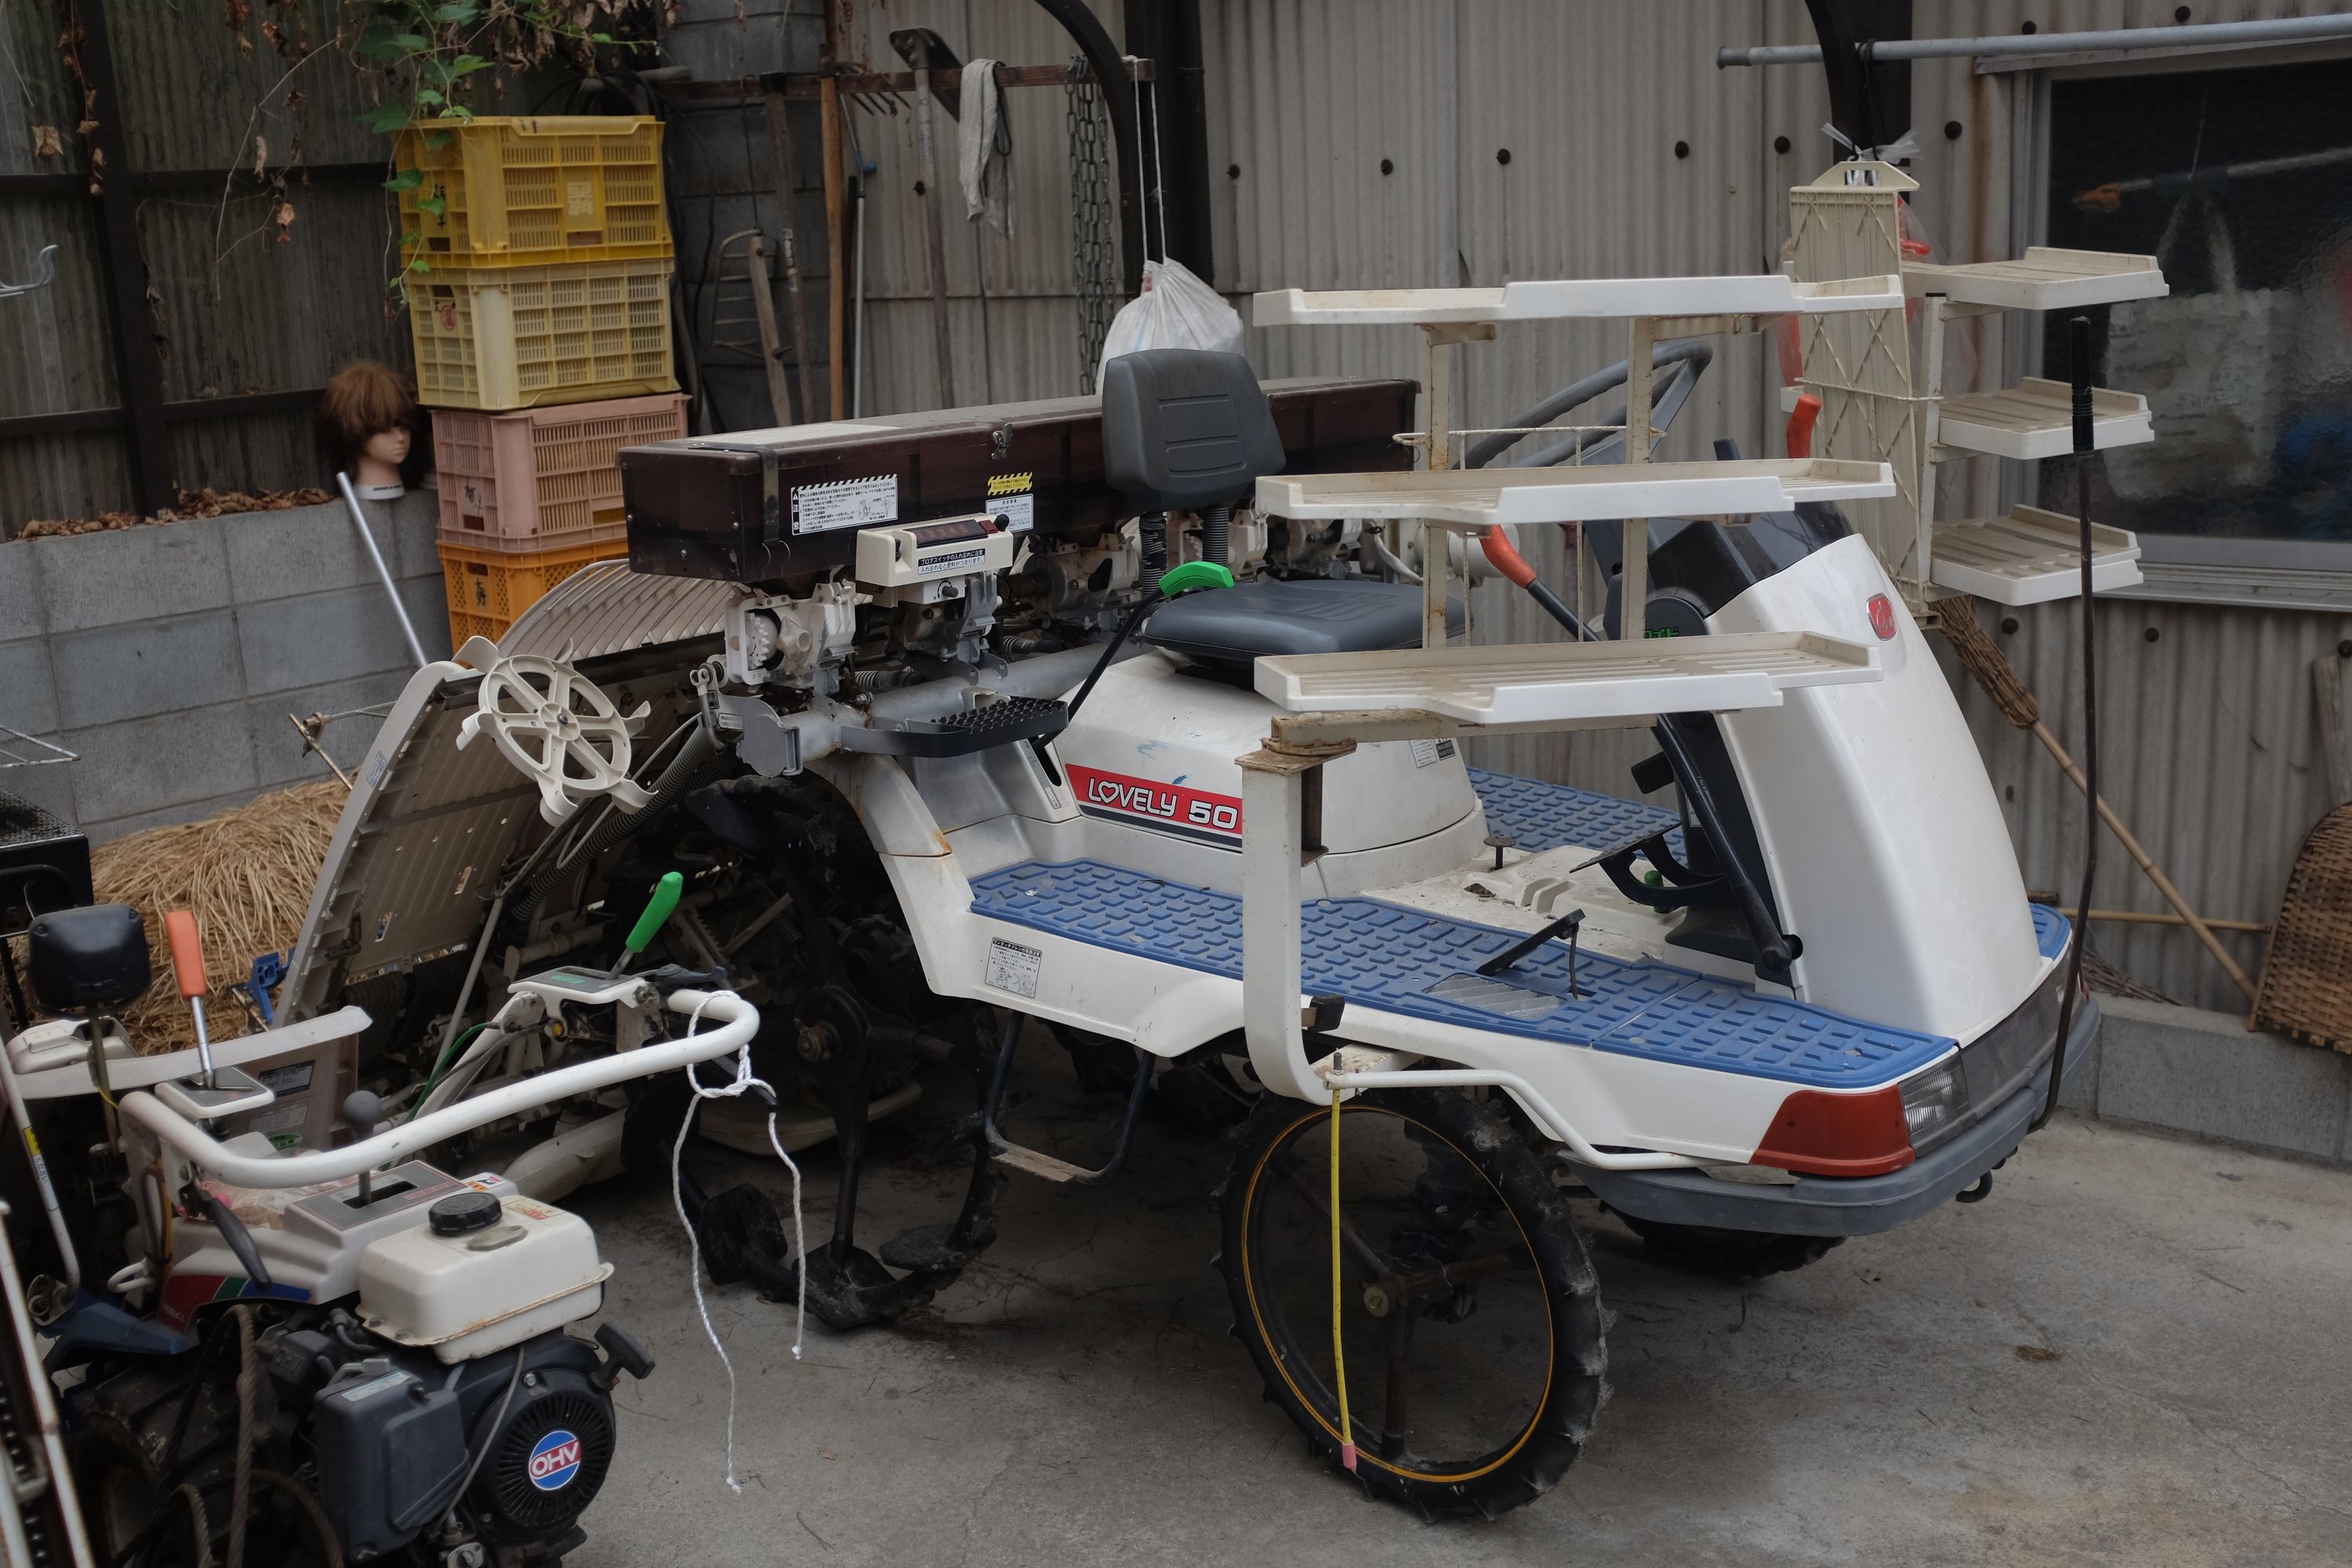 A small rice planting tractor parked in a garage with a mannequin’s head on a shelf behind it.